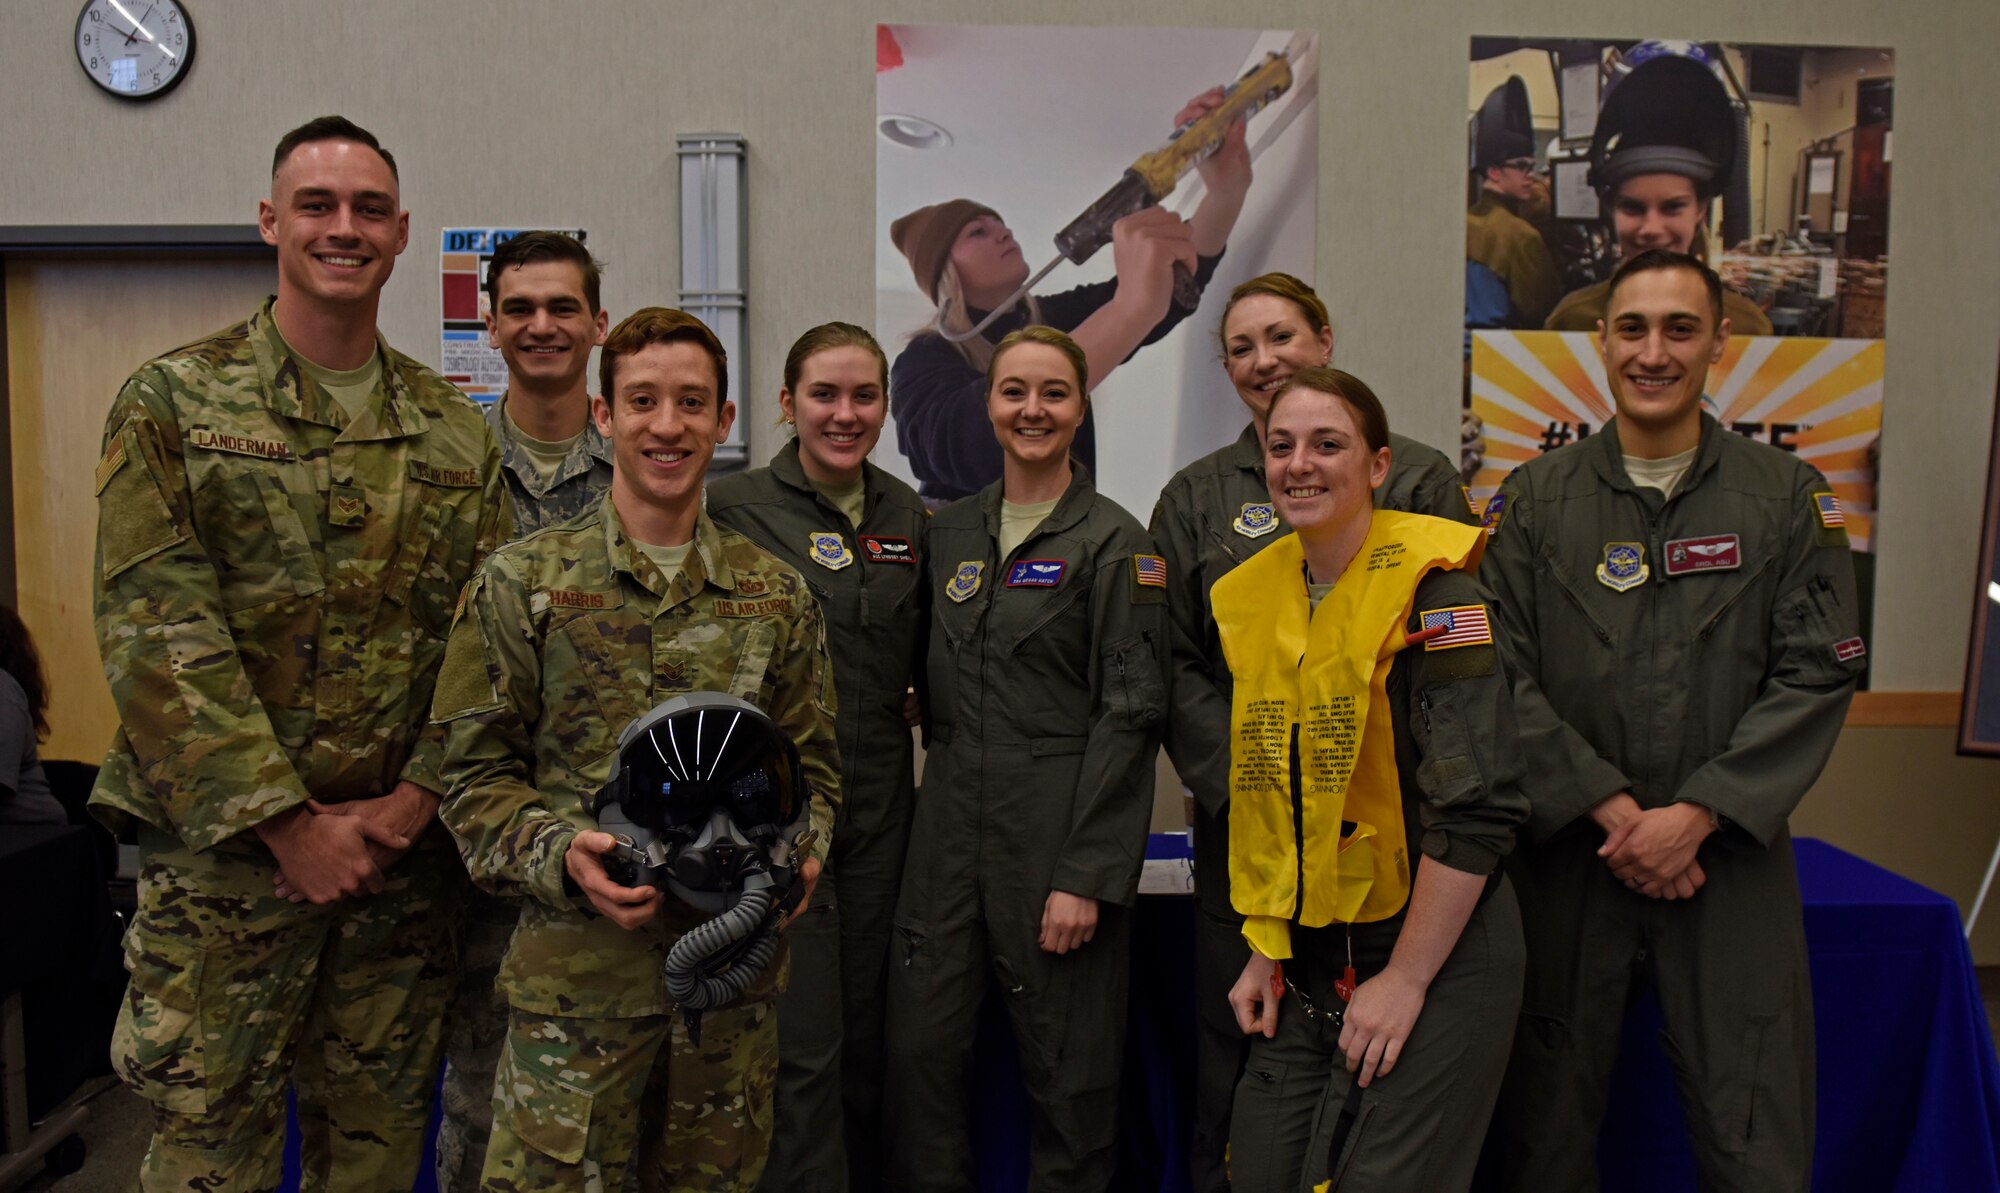 Airmen from the 92nd Air Refueling Wing pose for a photo during the annual NEWTech Skills Center job fair in Spokane, Washington, April 24, 2019. The annual job fair is hosted for 8th graders across 11 schools districts in Spokane County to help students mold their pathways before they go to high school. (U.S. Air Force photo by Senior Airman Jesenia Landaverde)